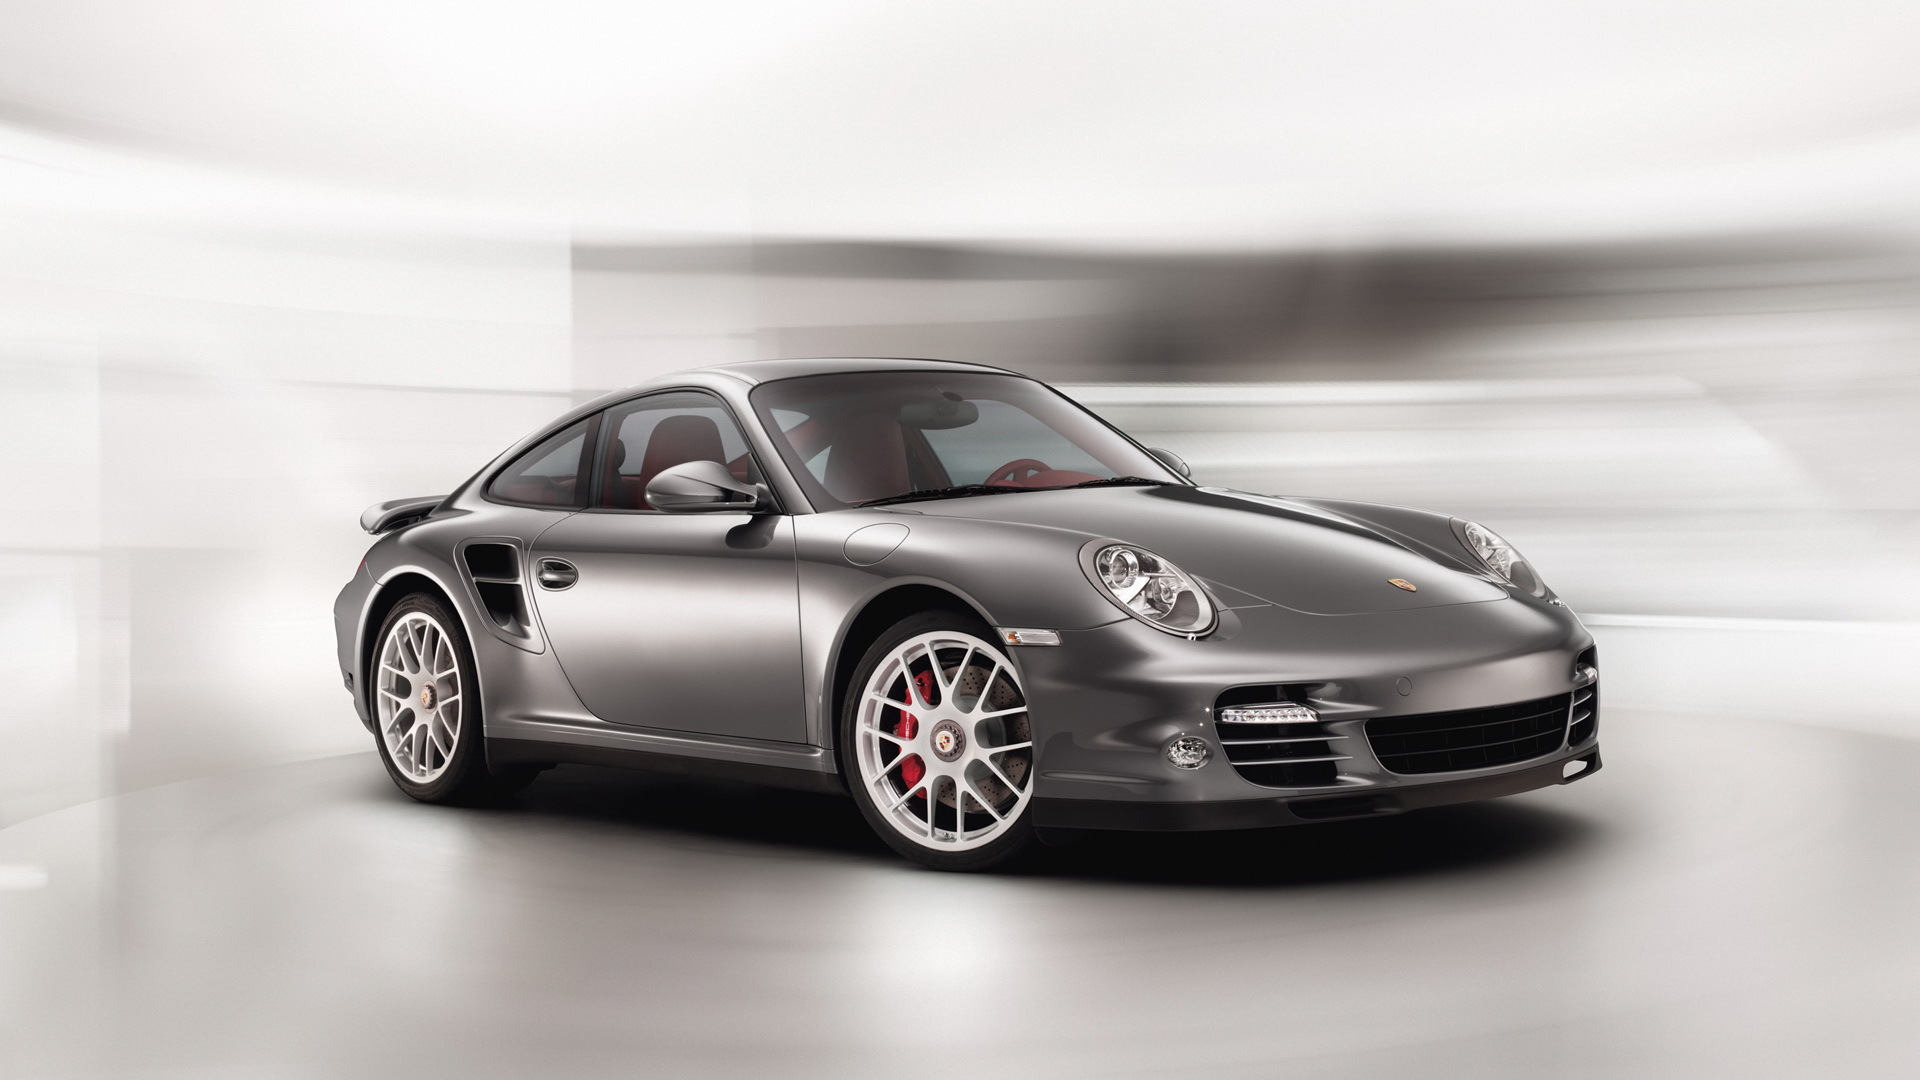 38843 3840x1080 PC pictures for free, download porsche, gray, transport, auto 3840x1080 wallpapers on your desktop